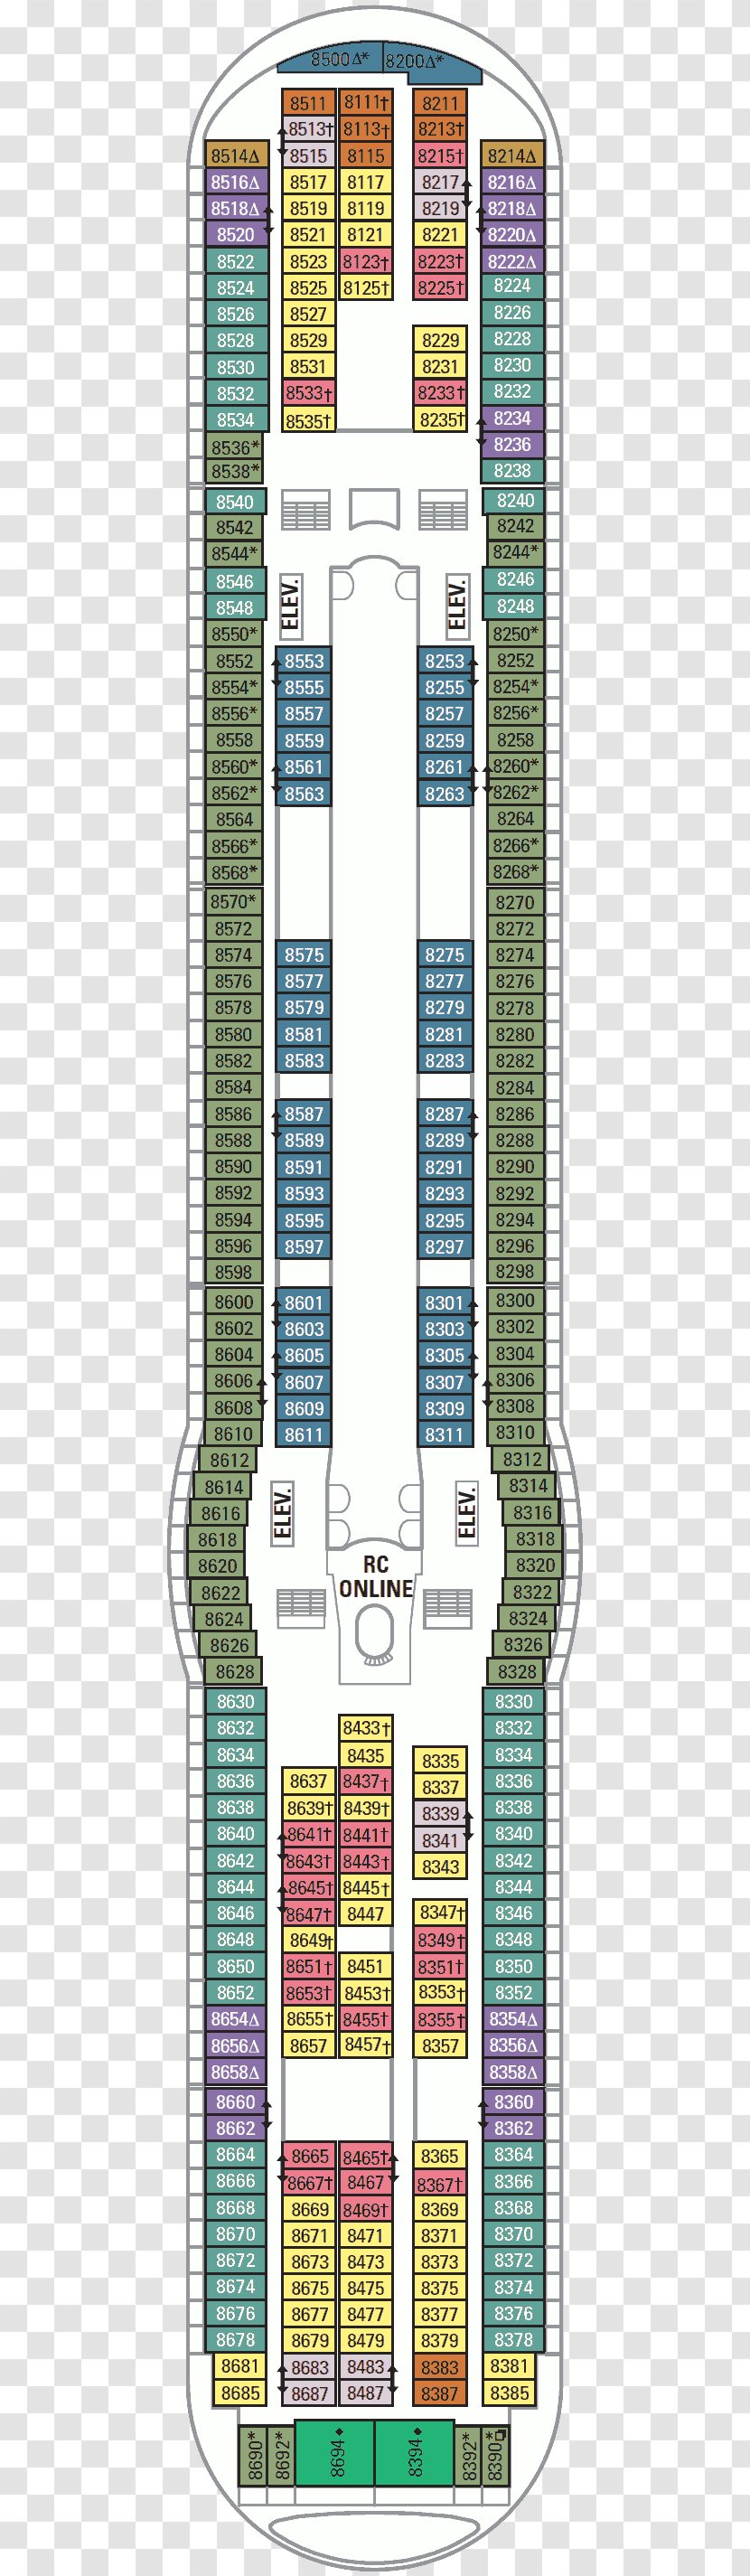 MS Navigator Of The Seas Independence Oasis Voyager Adventure - Cabin - Cruise Ship Transparent PNG